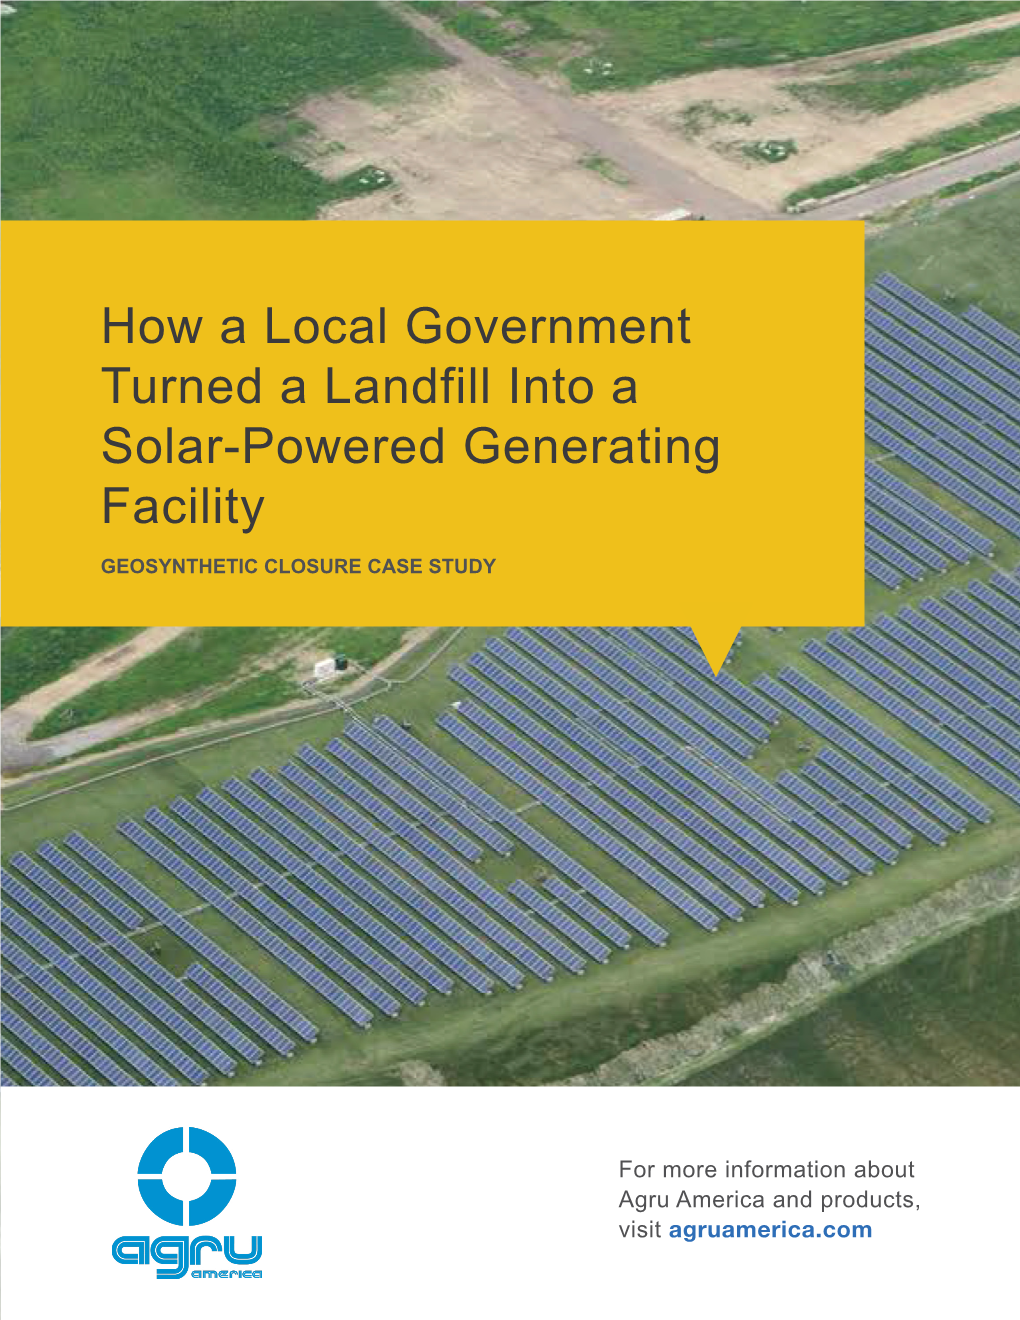 How a Local Government Turned a Landfill Into a Solar-Powered Generating Facility